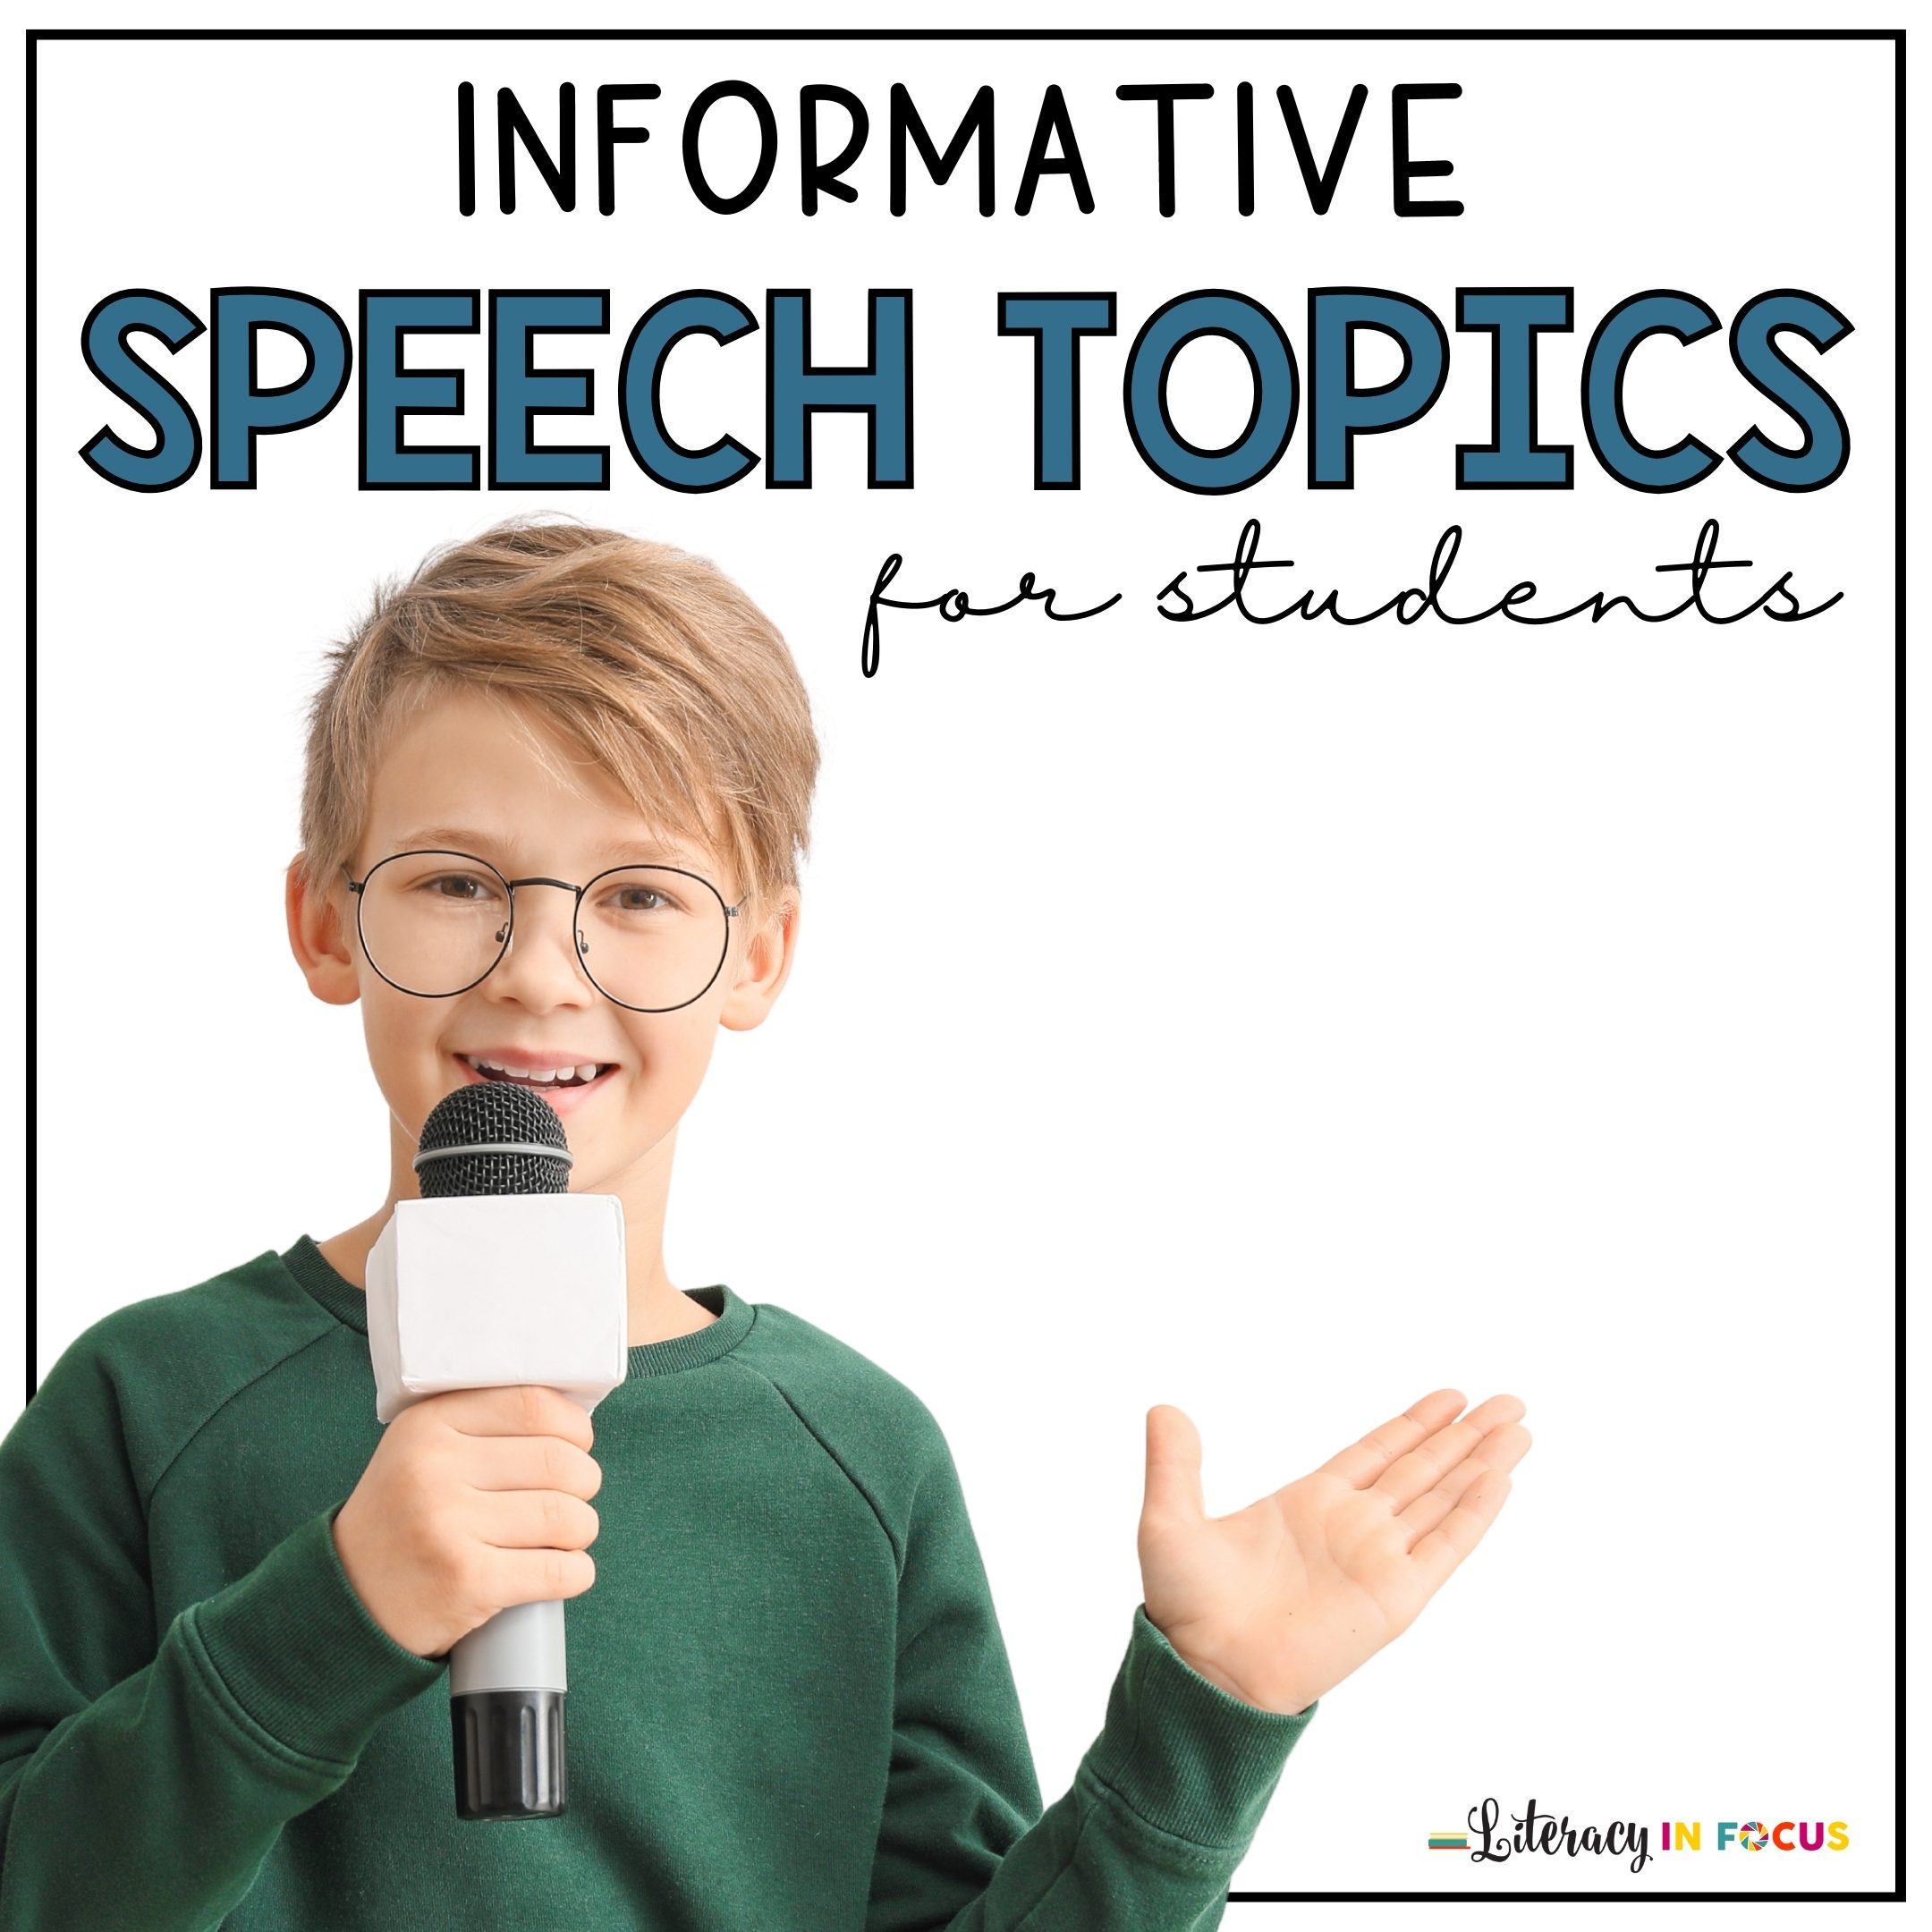 list of speech topics for students